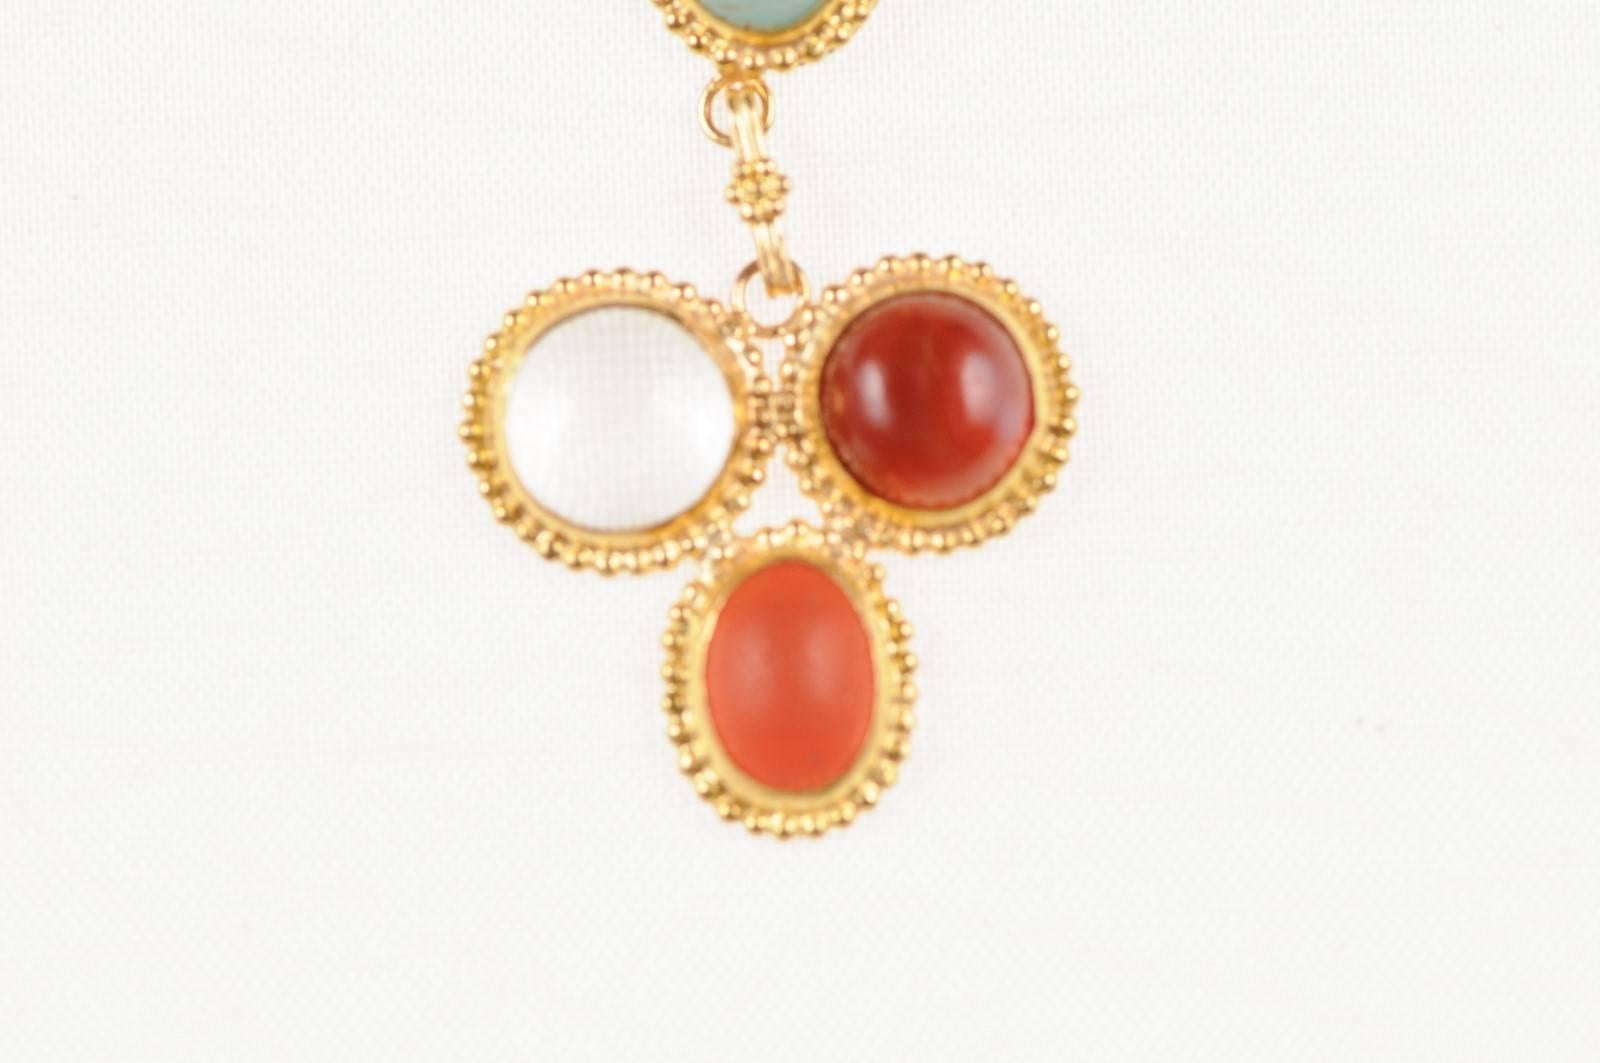 Gold Lovely Multicolored Drop Necklace Pendant of Old Roman Glass '400 AD-500 AD' For Sale